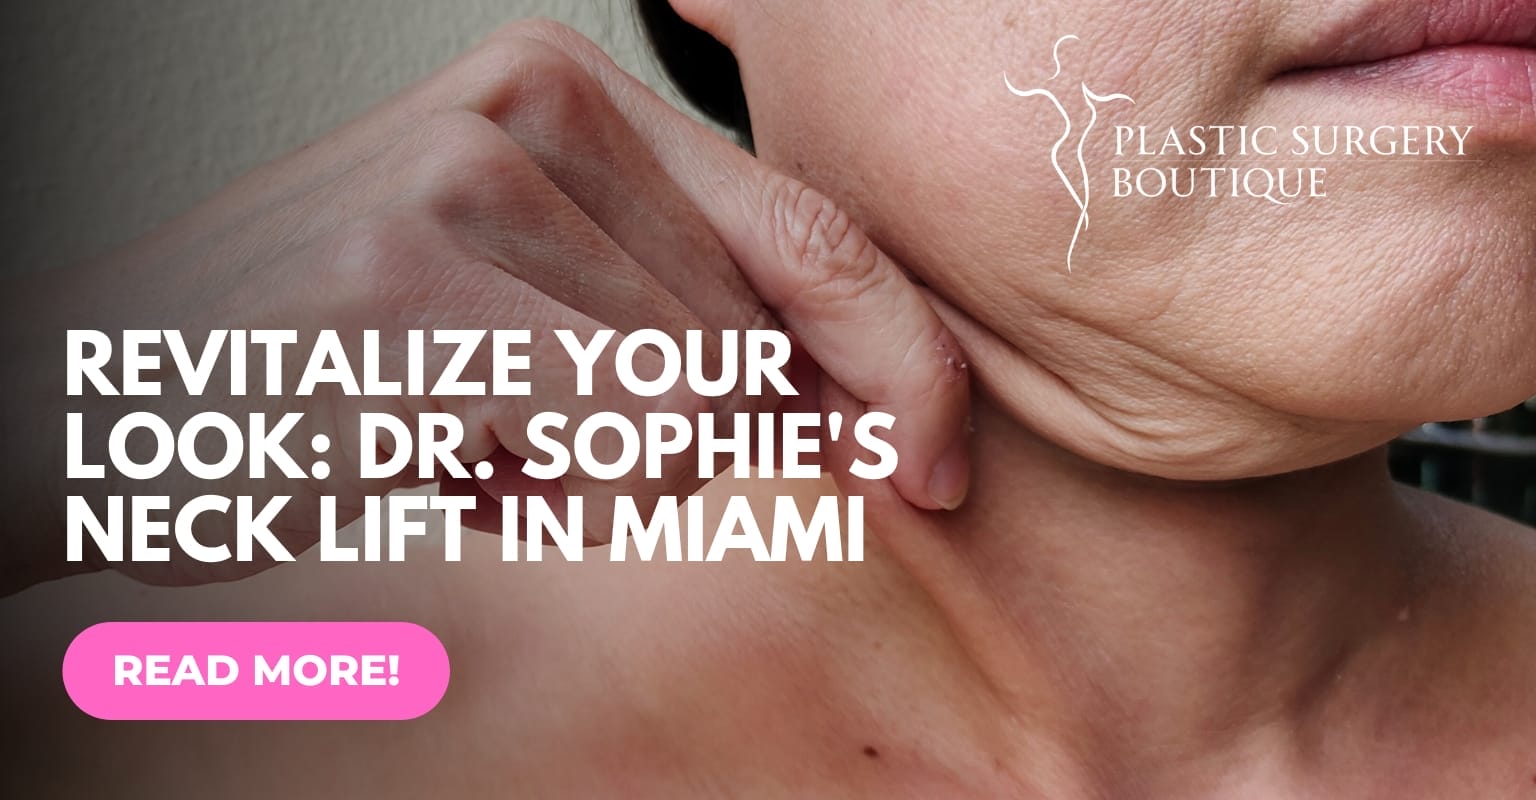 Revitalize Your Look: Dr. Sophie's Neck Lift in Miami